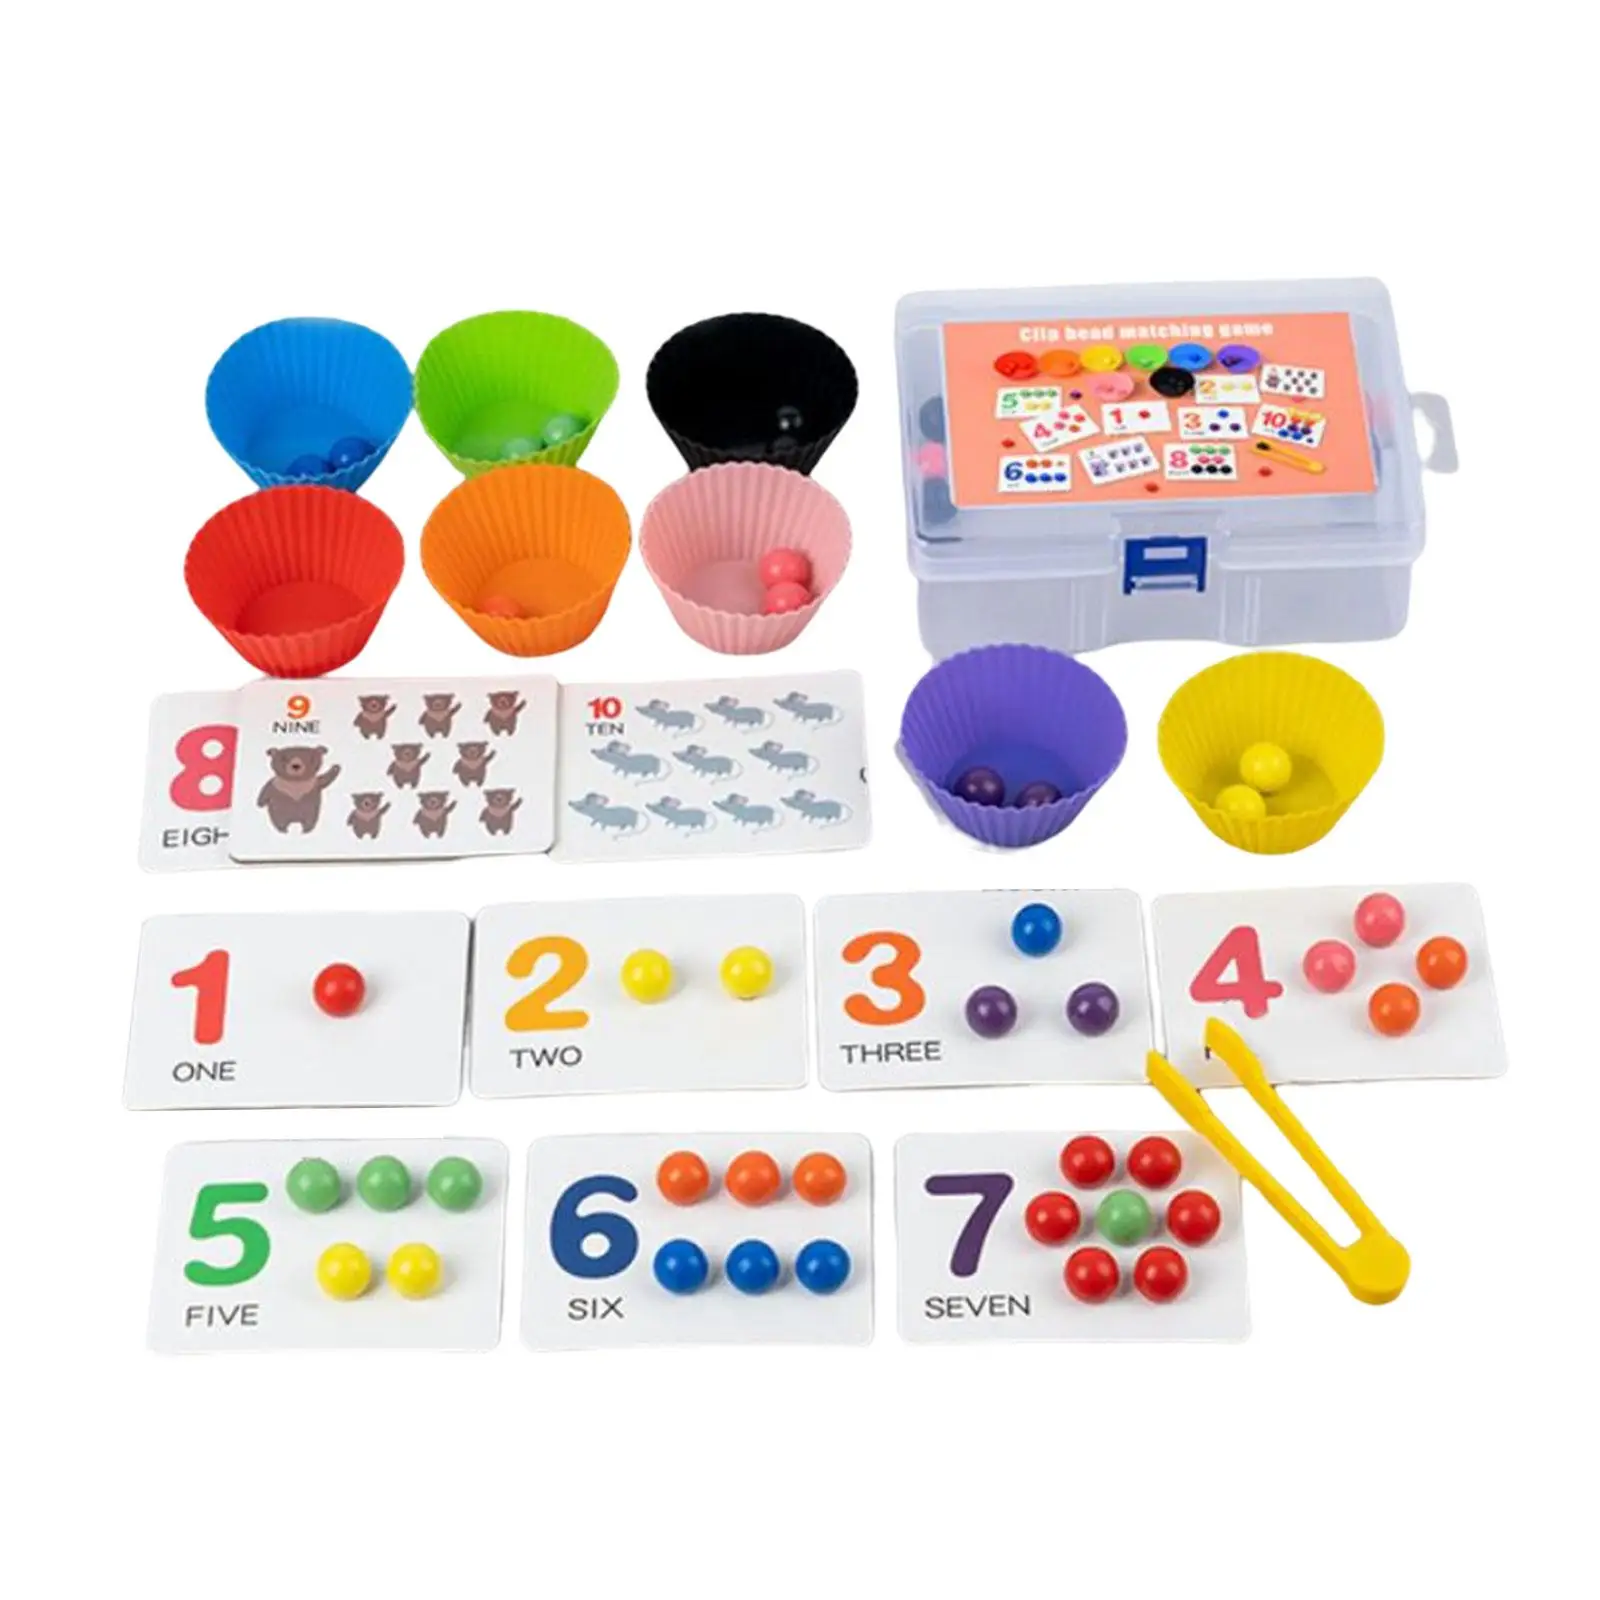 Beads Game Stacking Toy Preschool Learning Color Sorting and Counting Wooden Rainbow Balls in Cups for Children Kids